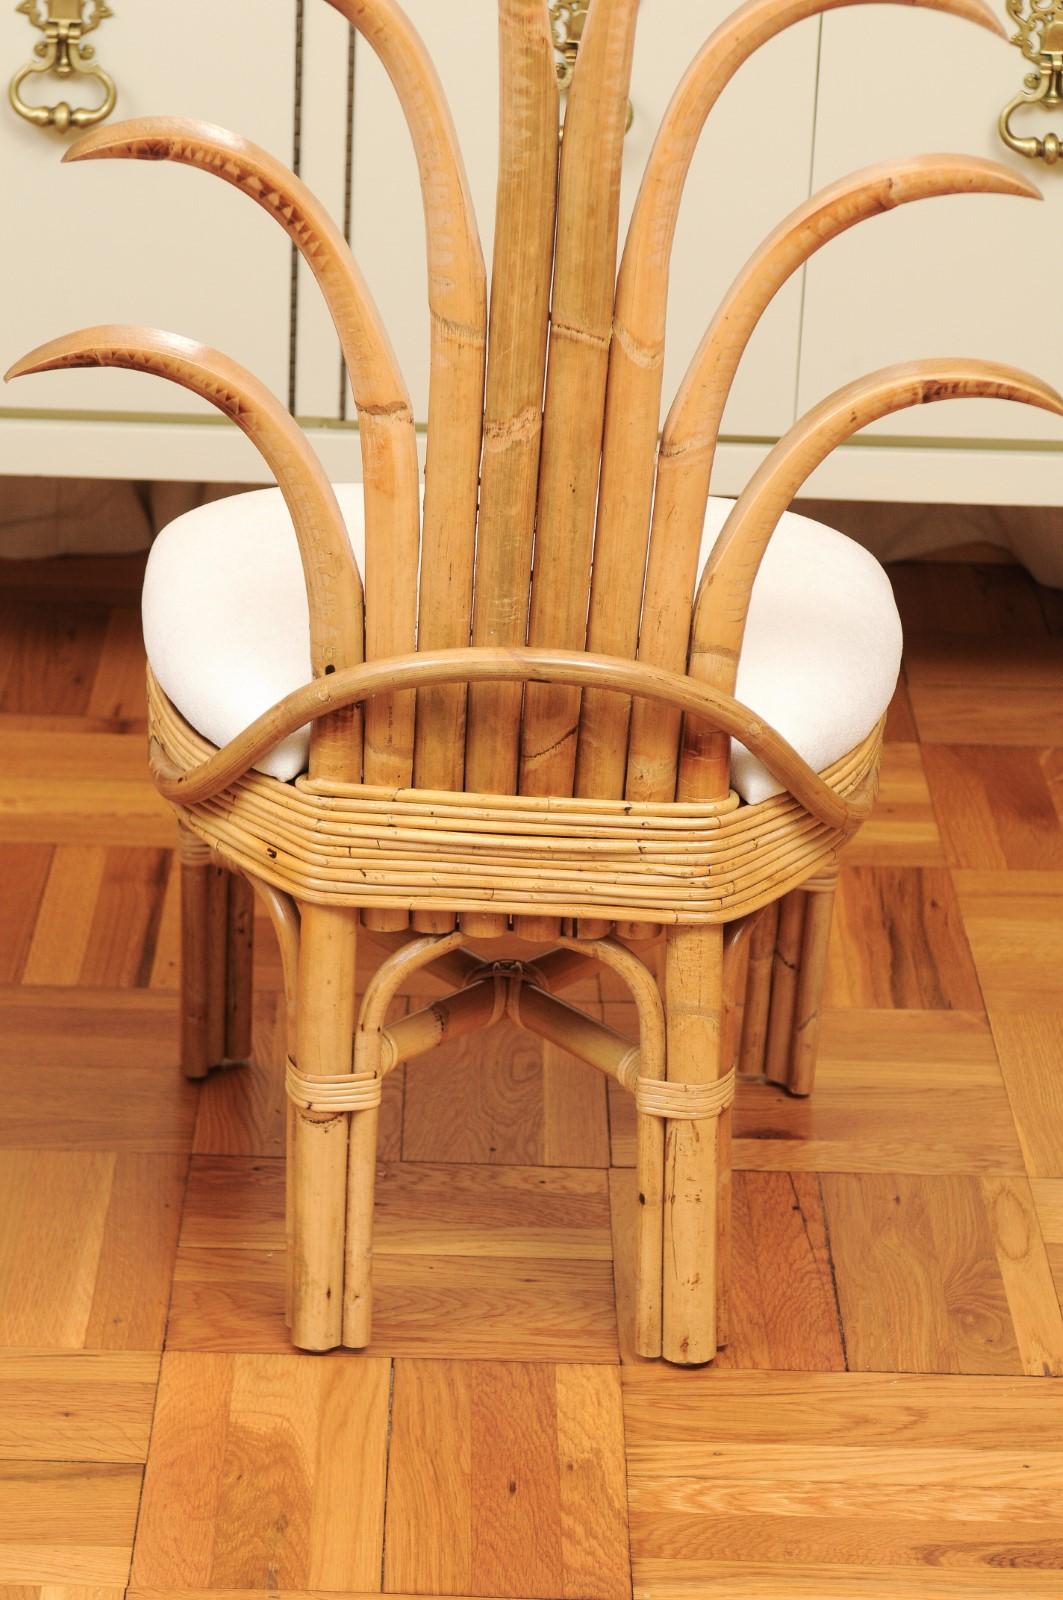 Exquisite Set of 12 Rattan and Cane Palm Frond Dining Chairs, circa 1950 For Sale 9